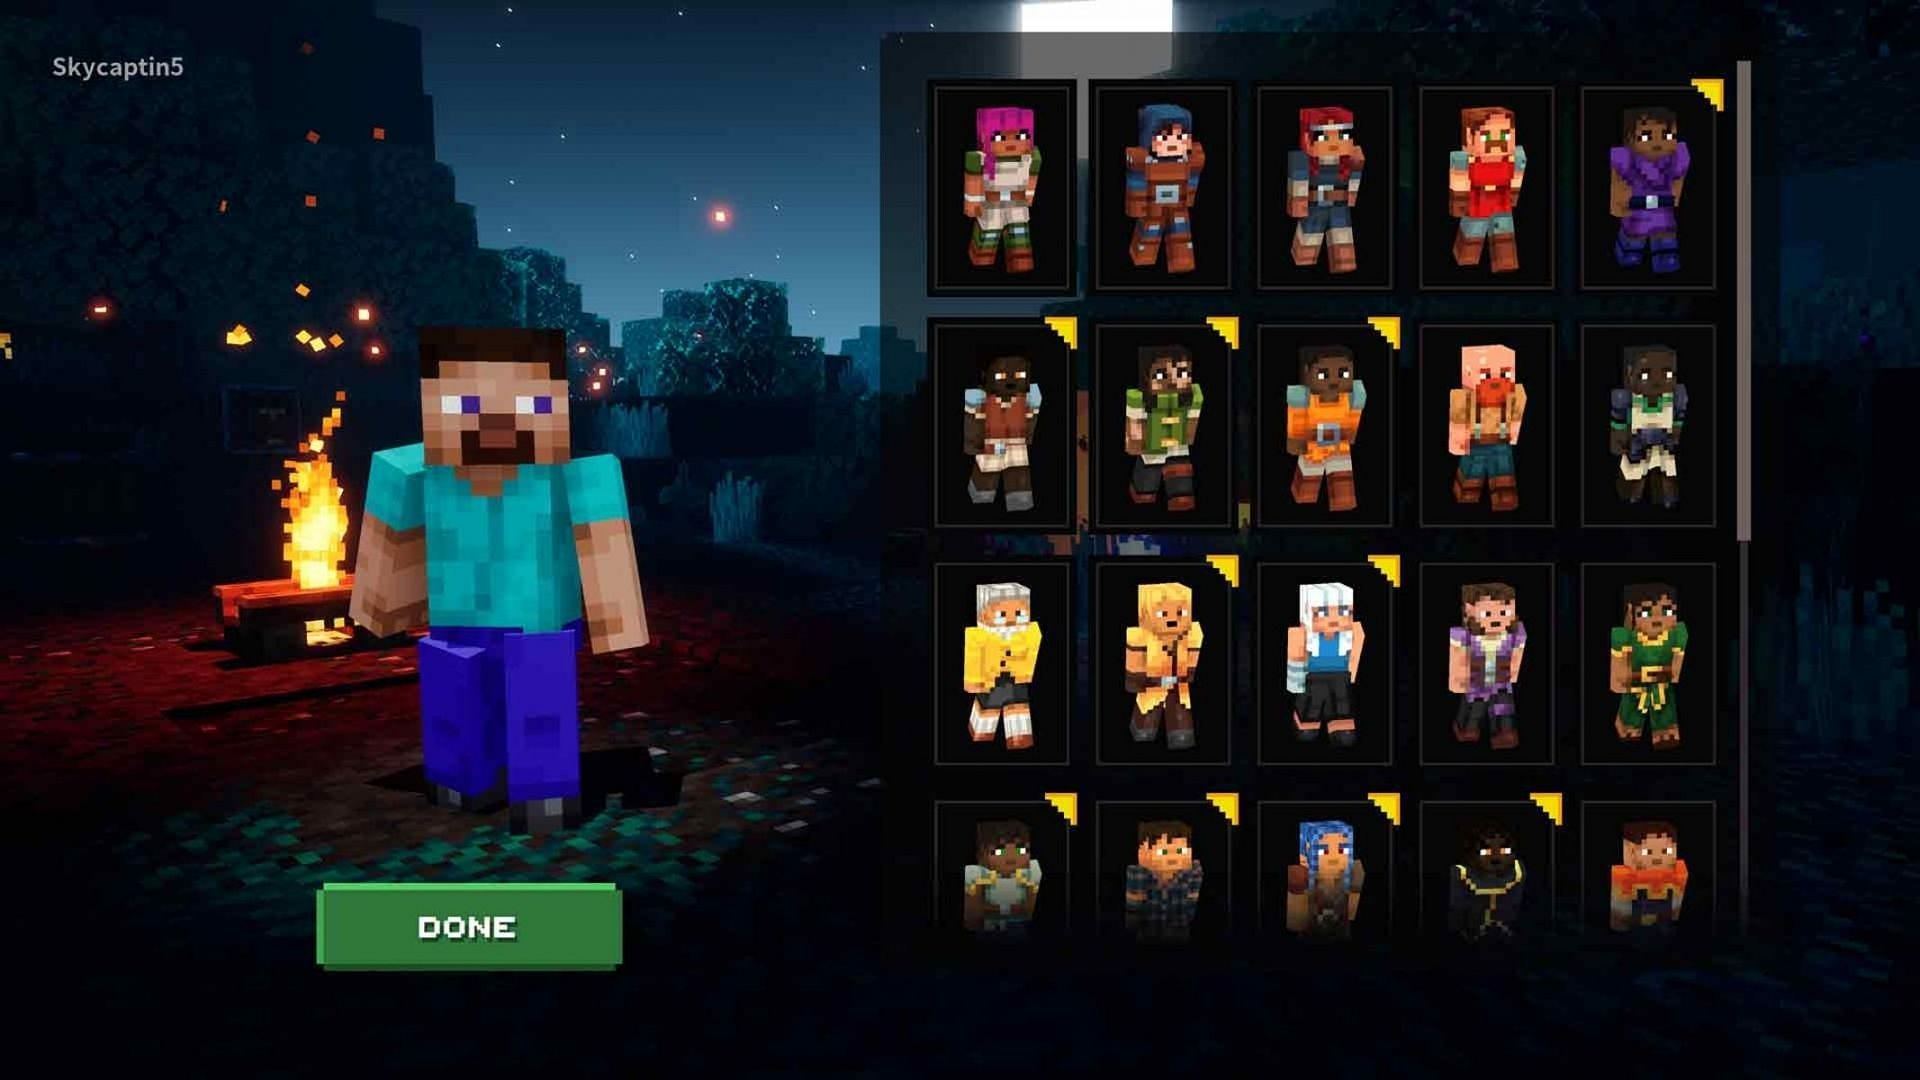 The roster of playable heroes in Minecraft Dungeons has increased steadily over multiple updates (Image via Mojang)